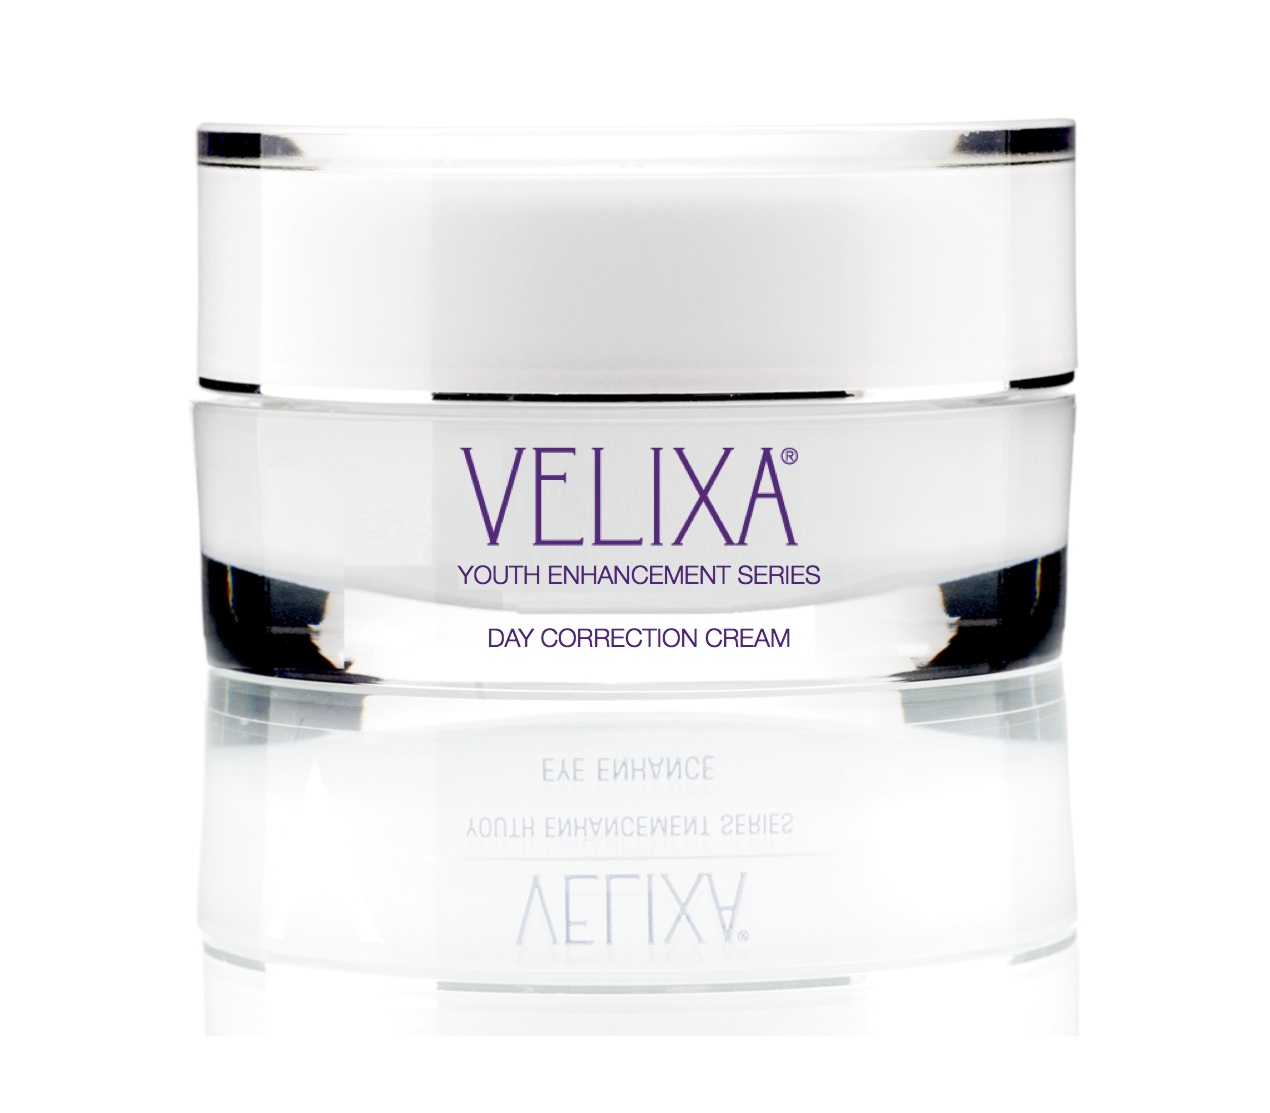 Getting Back Our Natural Glow – The Day Correction Cream by Velixa